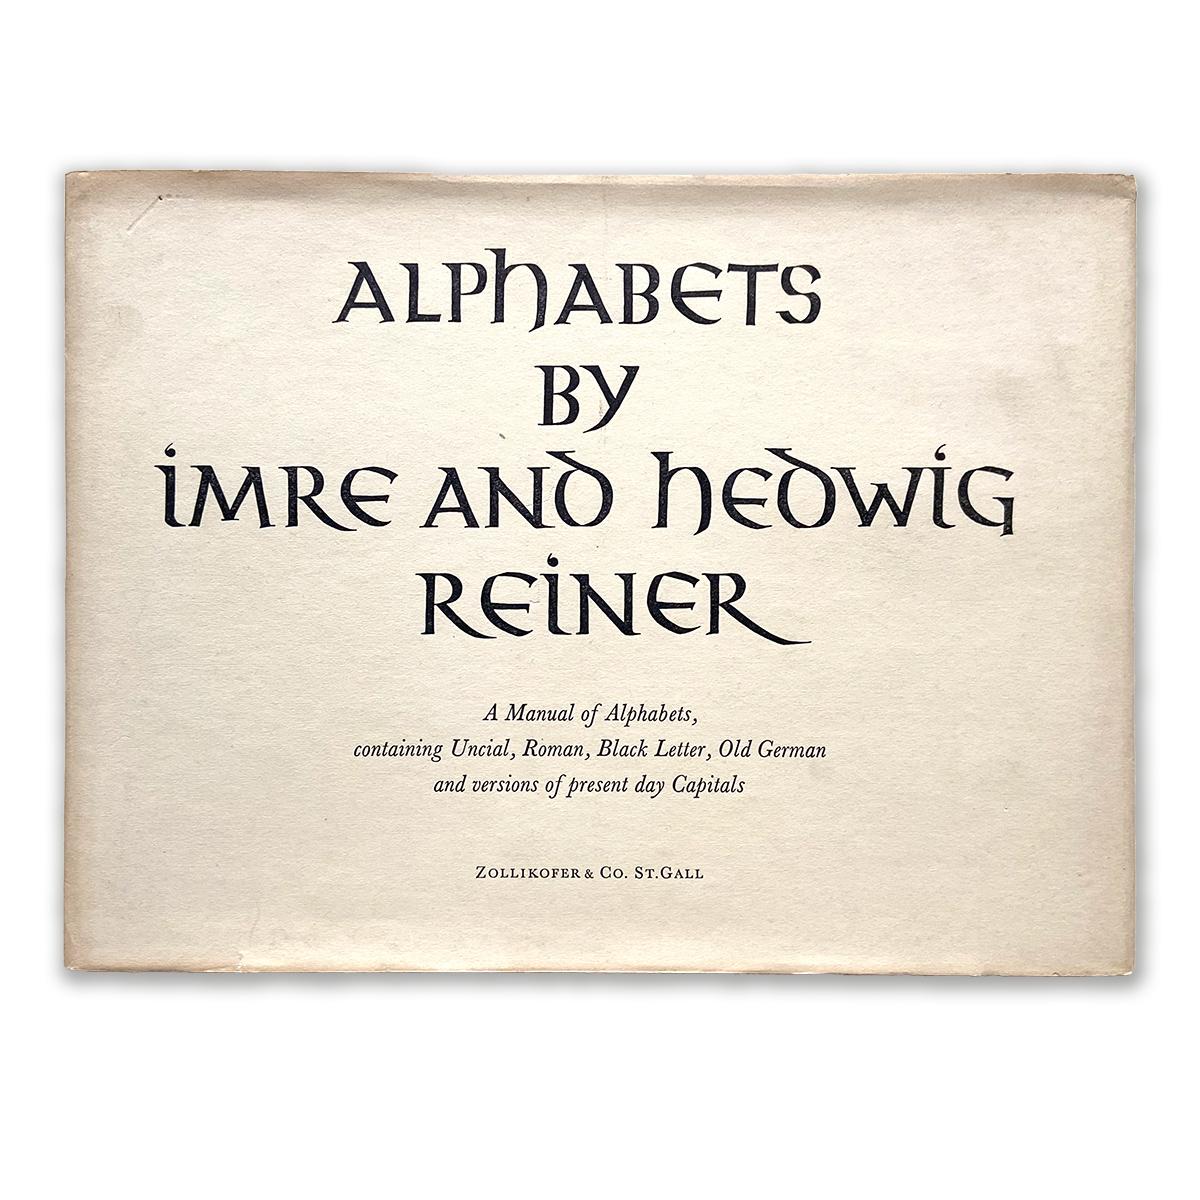 Alphabets by Imre and Hedwig Reiner